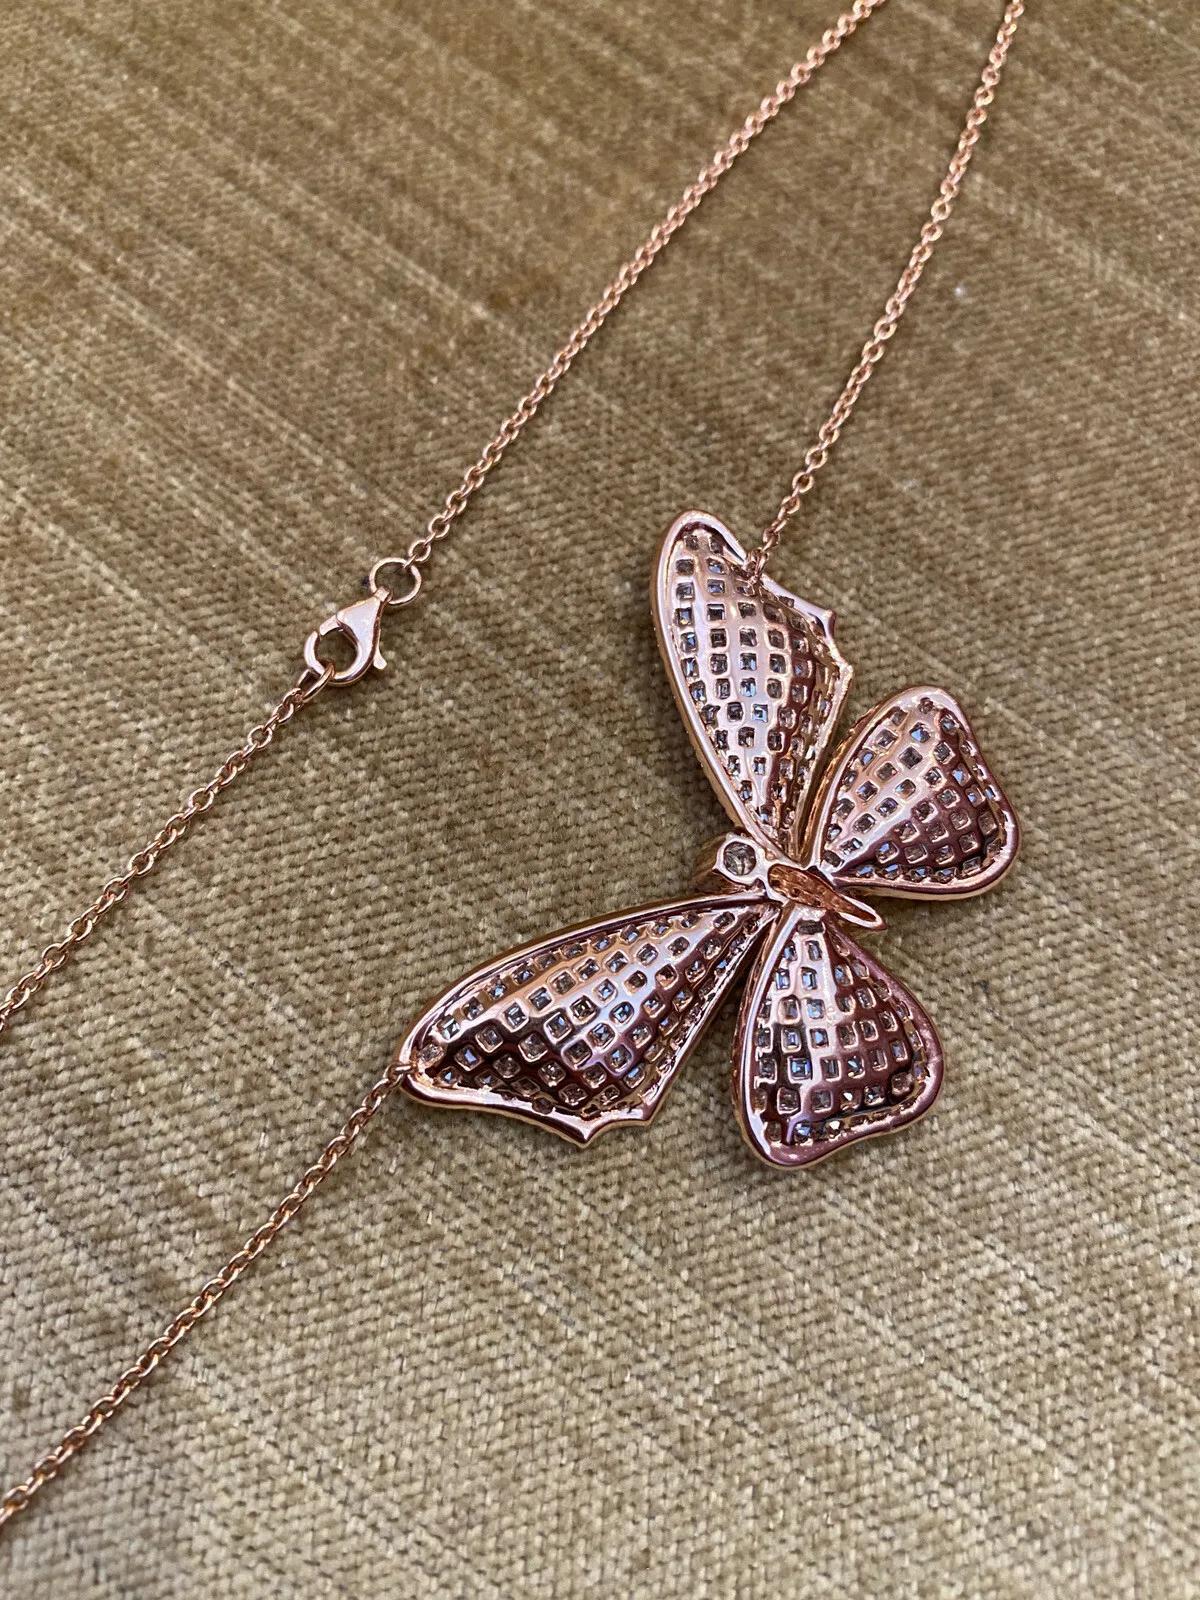 Large Pavé Diamond Butterfly Pendant Necklace in 18k Rose Gold In Excellent Condition For Sale In La Jolla, CA